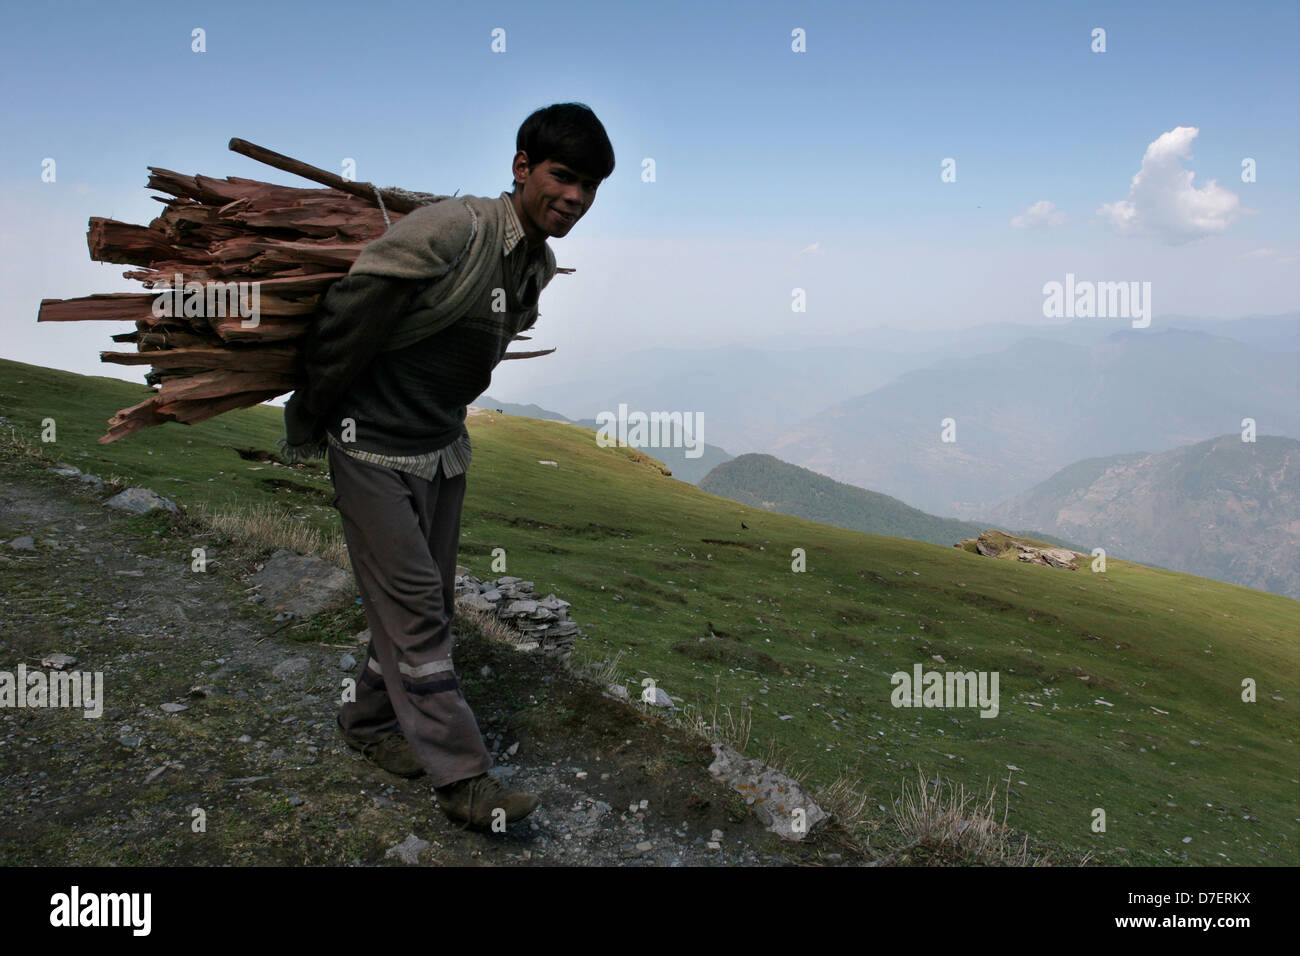 A local Garhwali man on his way home from collecting fire wood in the hills. Stock Photo